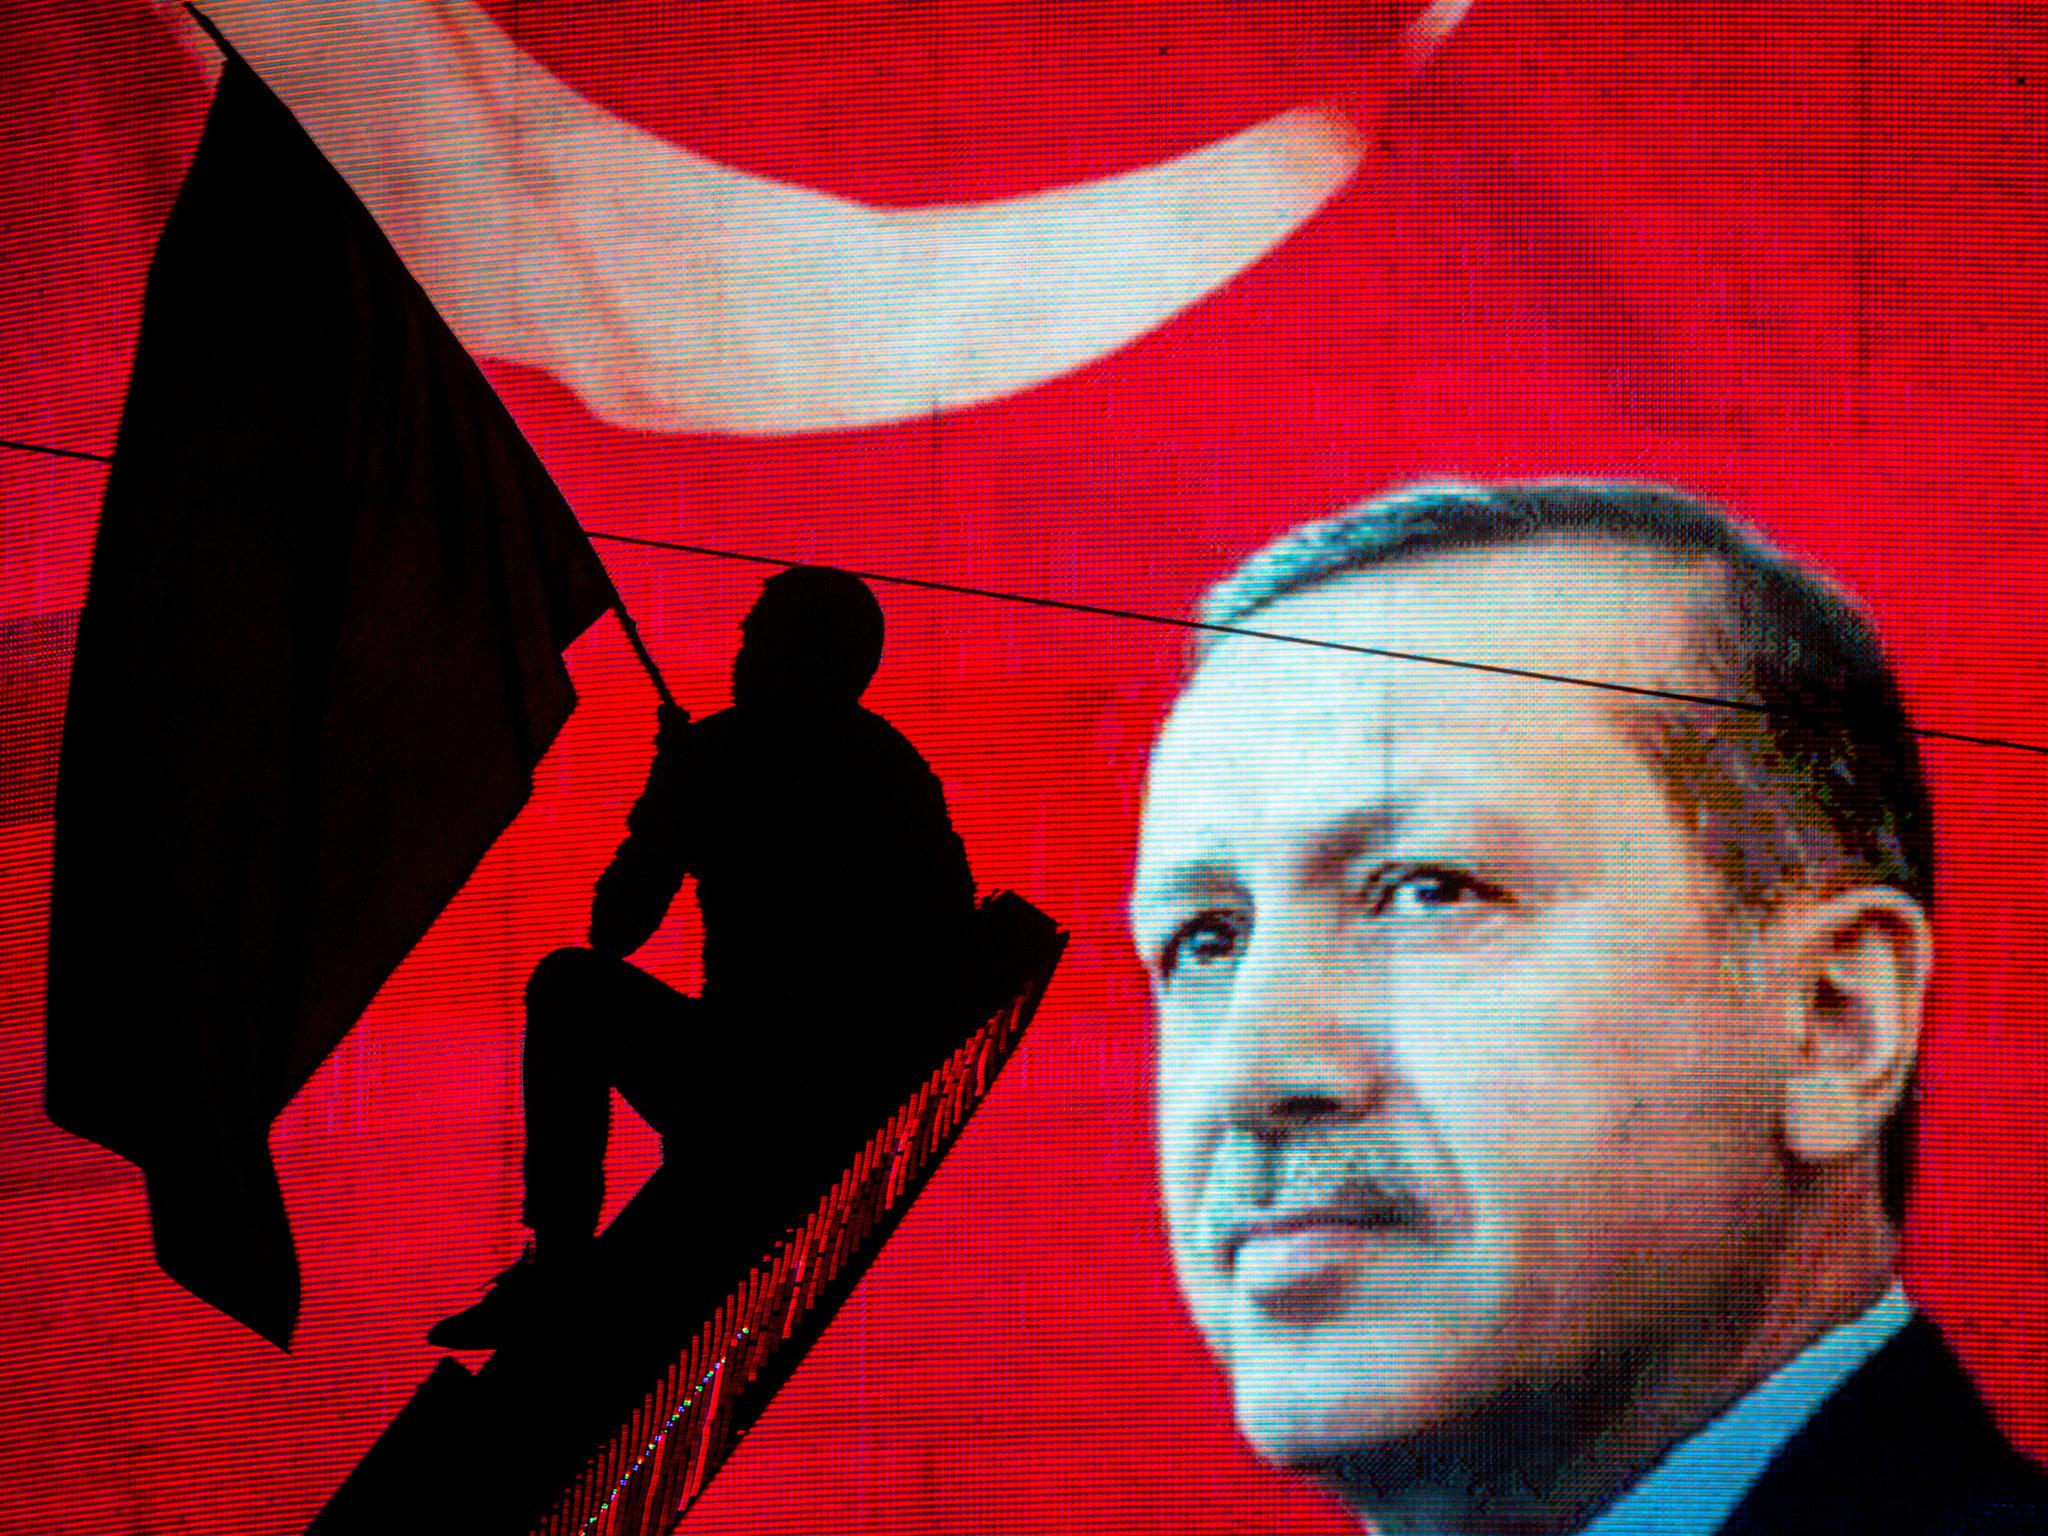 A supporter of Turkish President Recep Tayyip Erdogan waves a flag against an electronic billboard during a rally in Kizilay Square on 18 July, 2016 in Ankara, Turkey